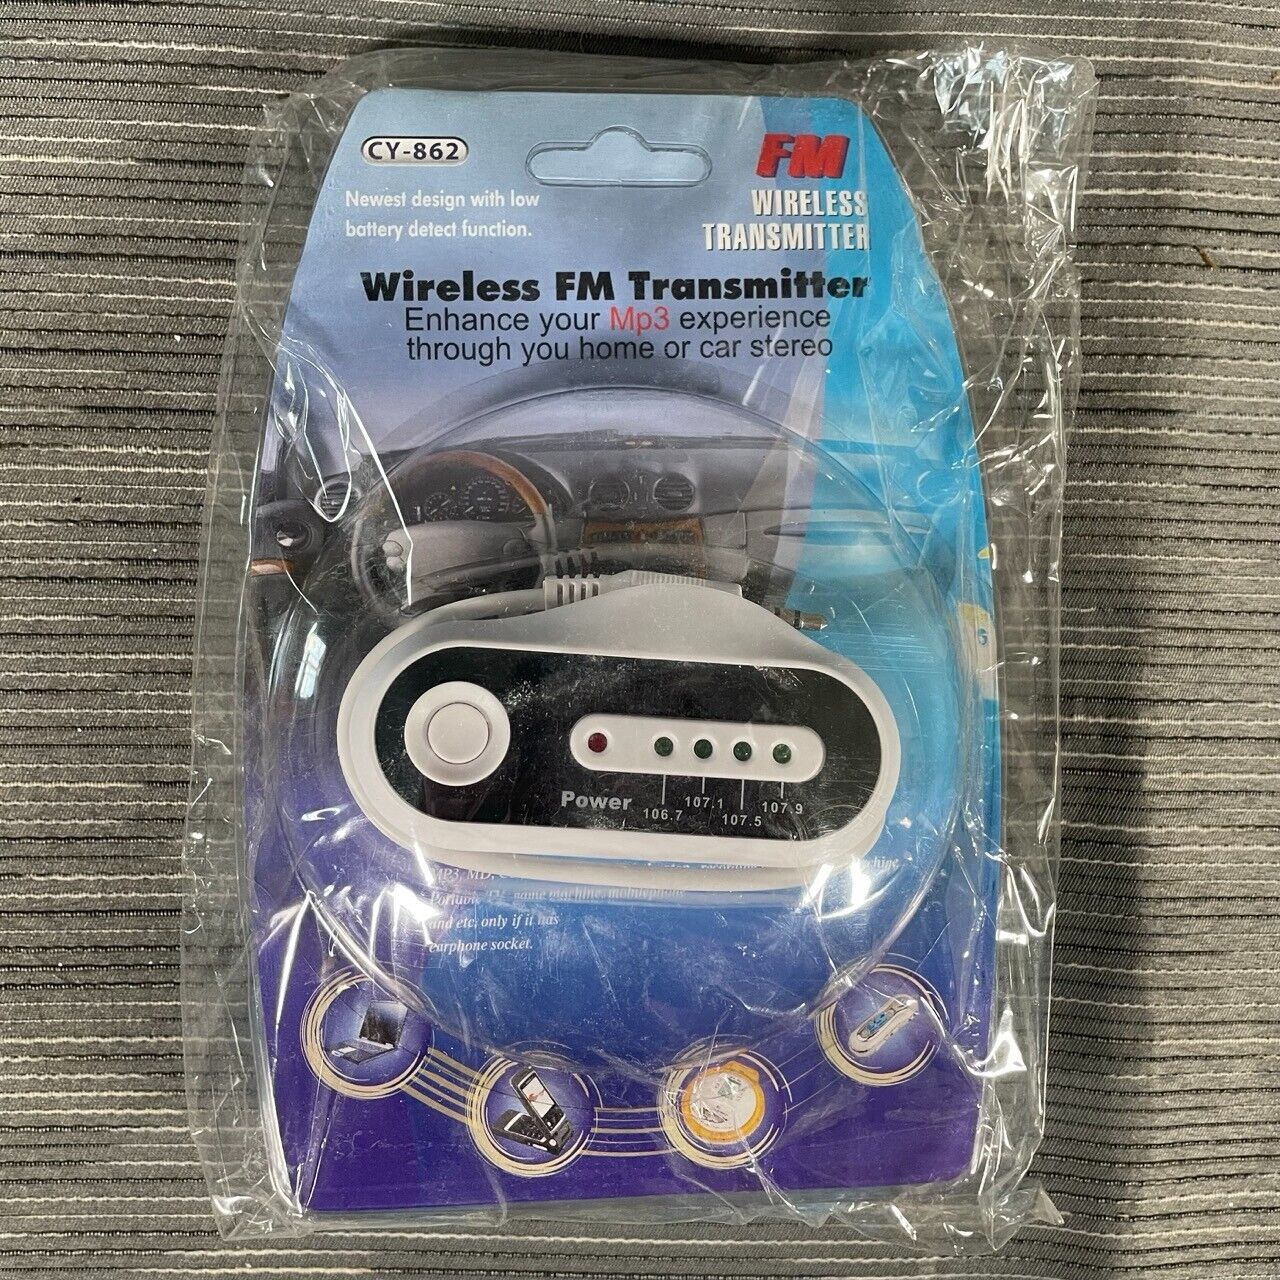 Wireless FM Transmitter CY-862 3.5mm Audio PIN New and Sealed FM CY-862